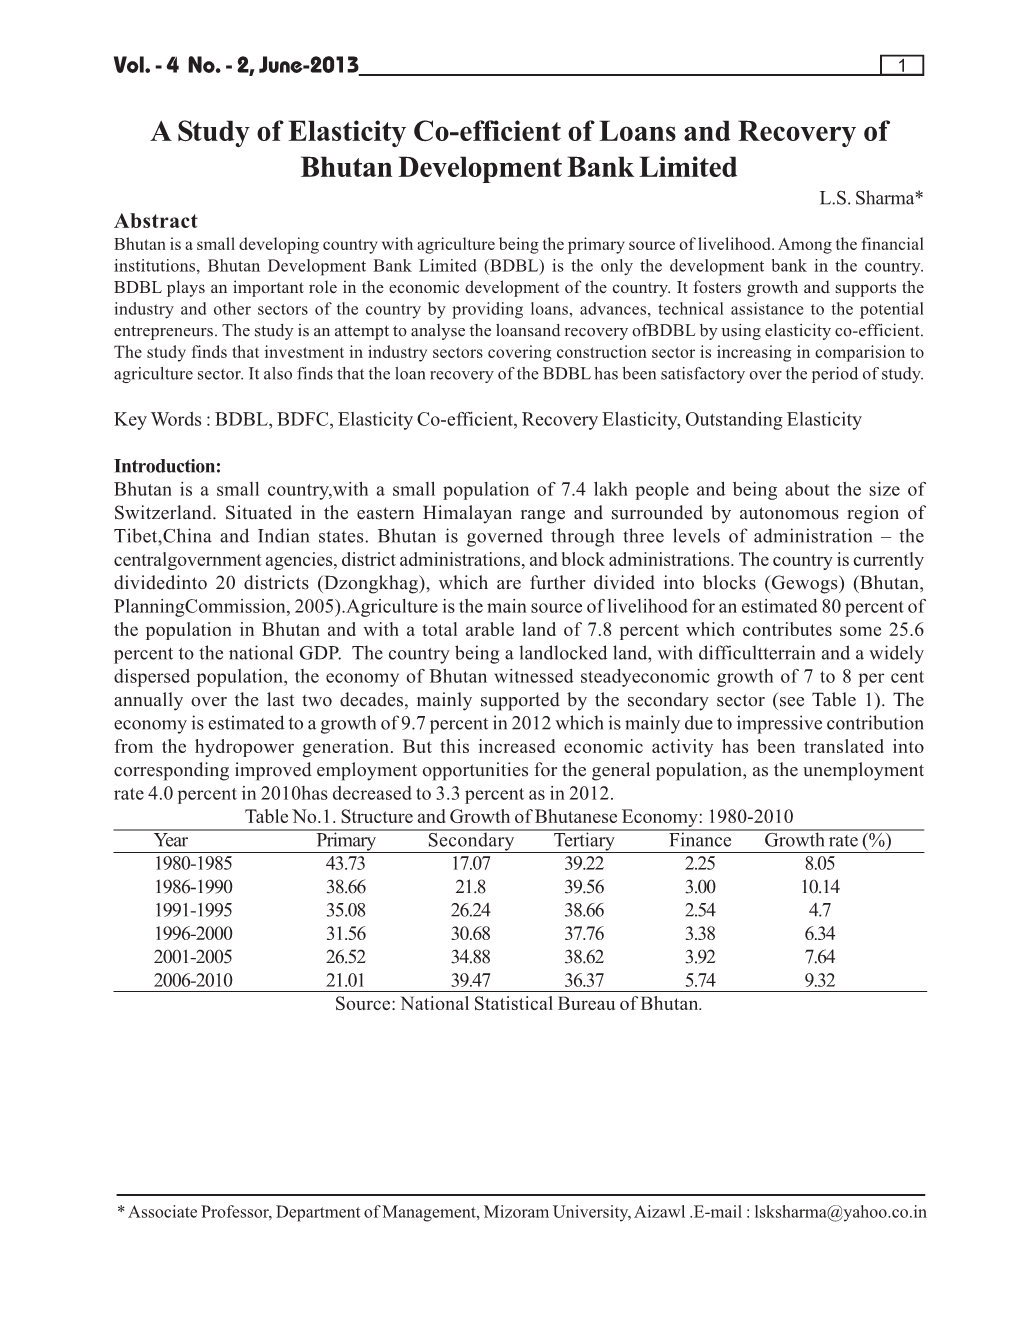 A Study of Elasticity Co-Efficient of Loans and Recovery of Bhutan Development Bank Limited L.S